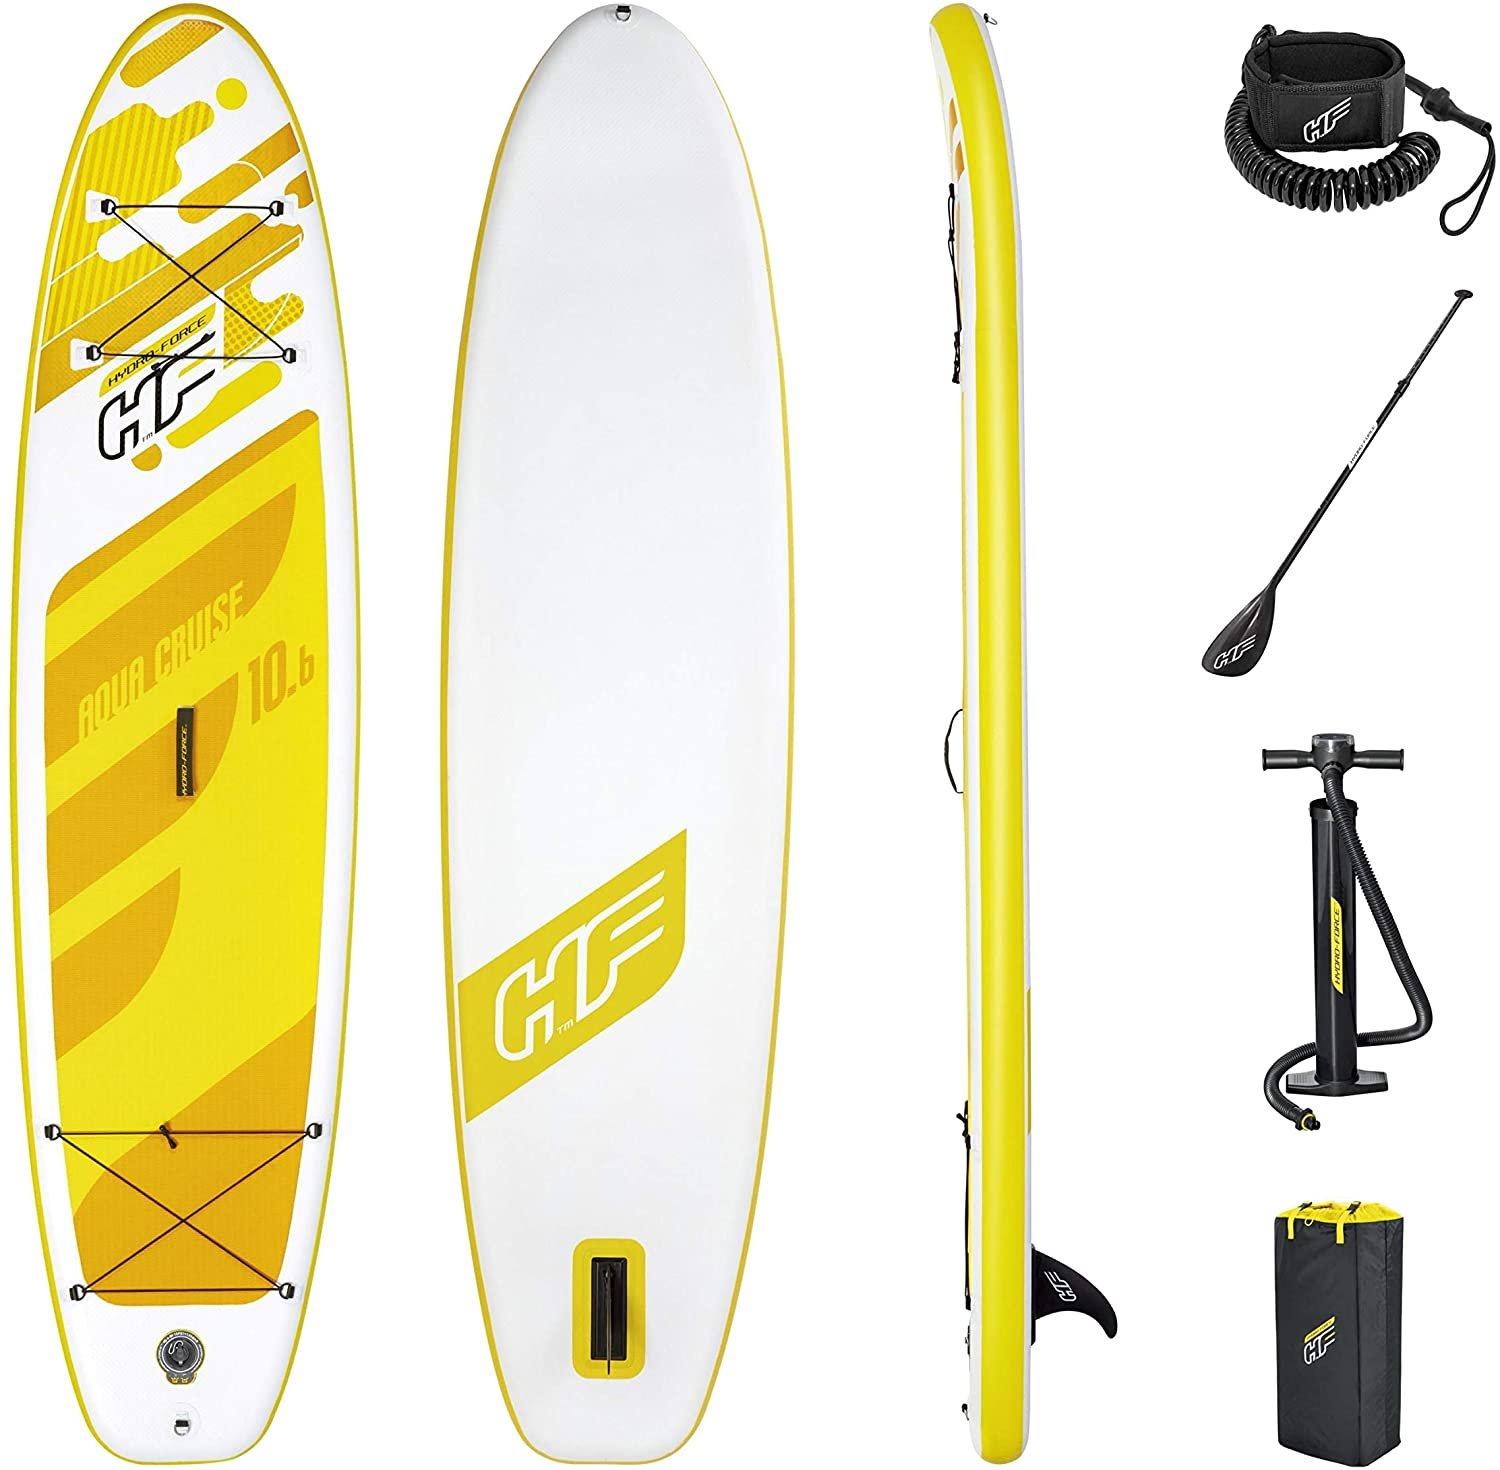 Hydro-Force Aqua Cruise Tech Sup Inflatable Stand-Up Paddleboard Set 10Ft 6|